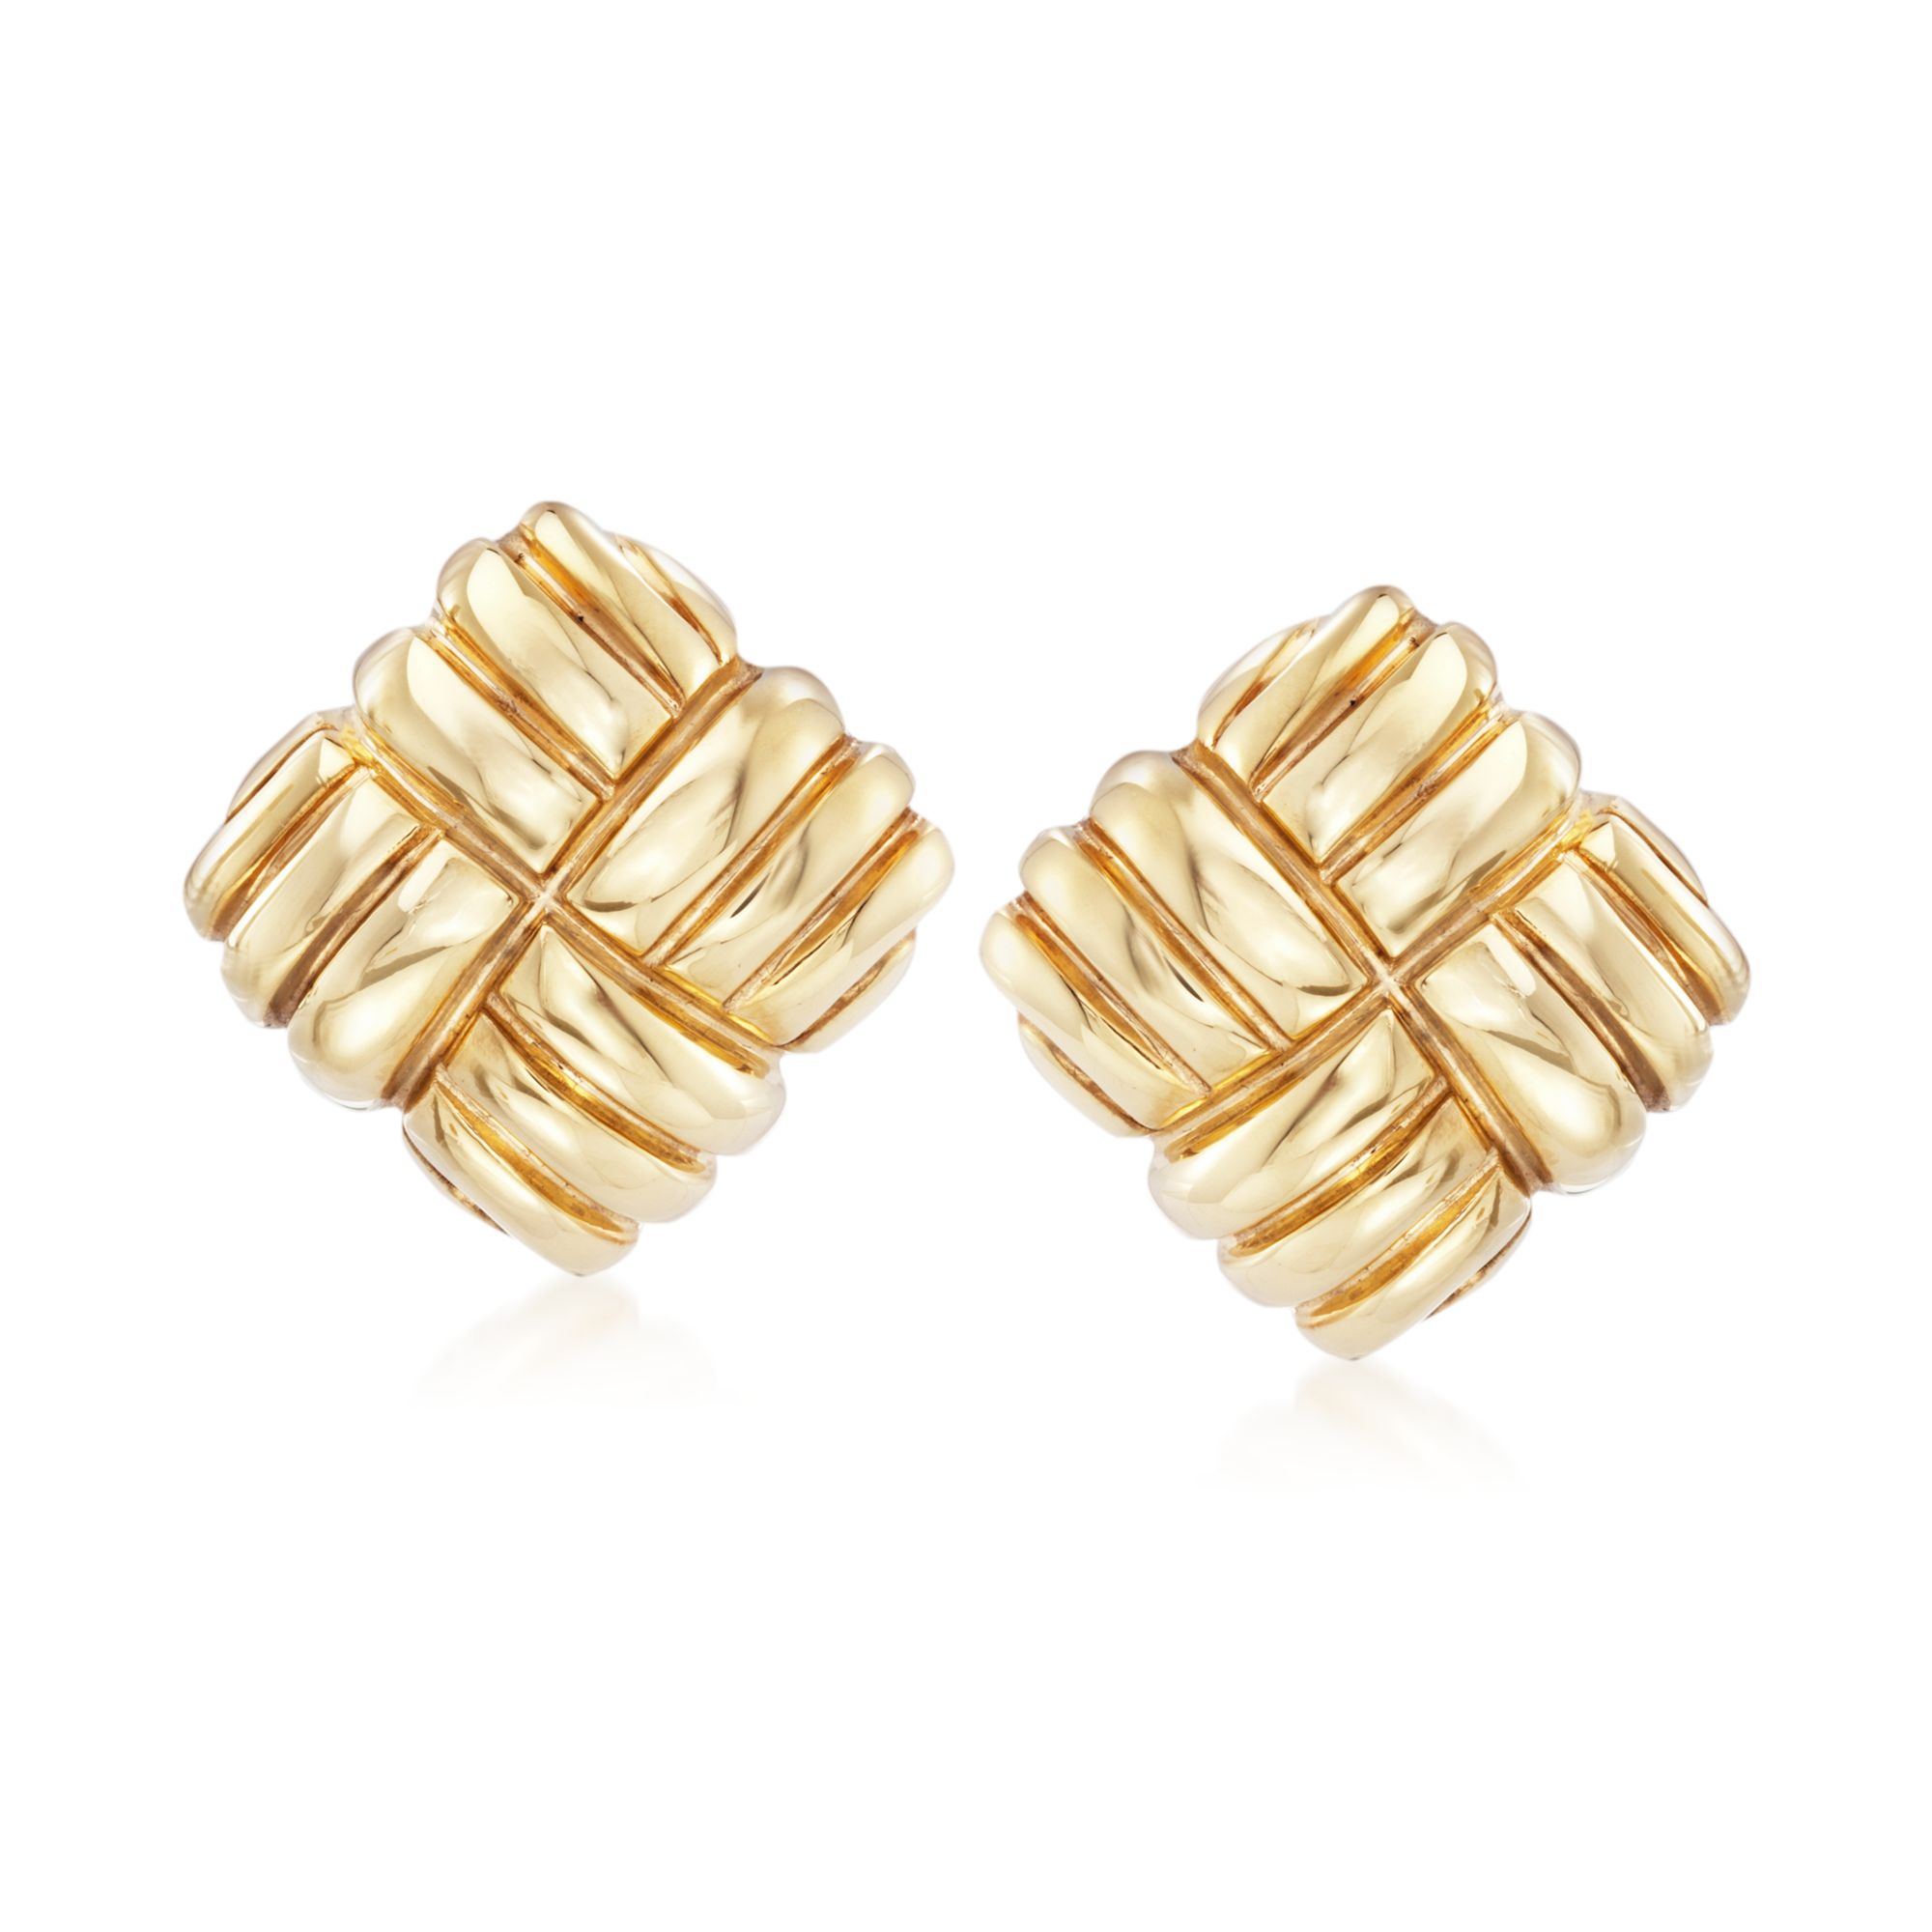 10kt Yellow Gold Ribbed Love Knot Ball Post Earrings